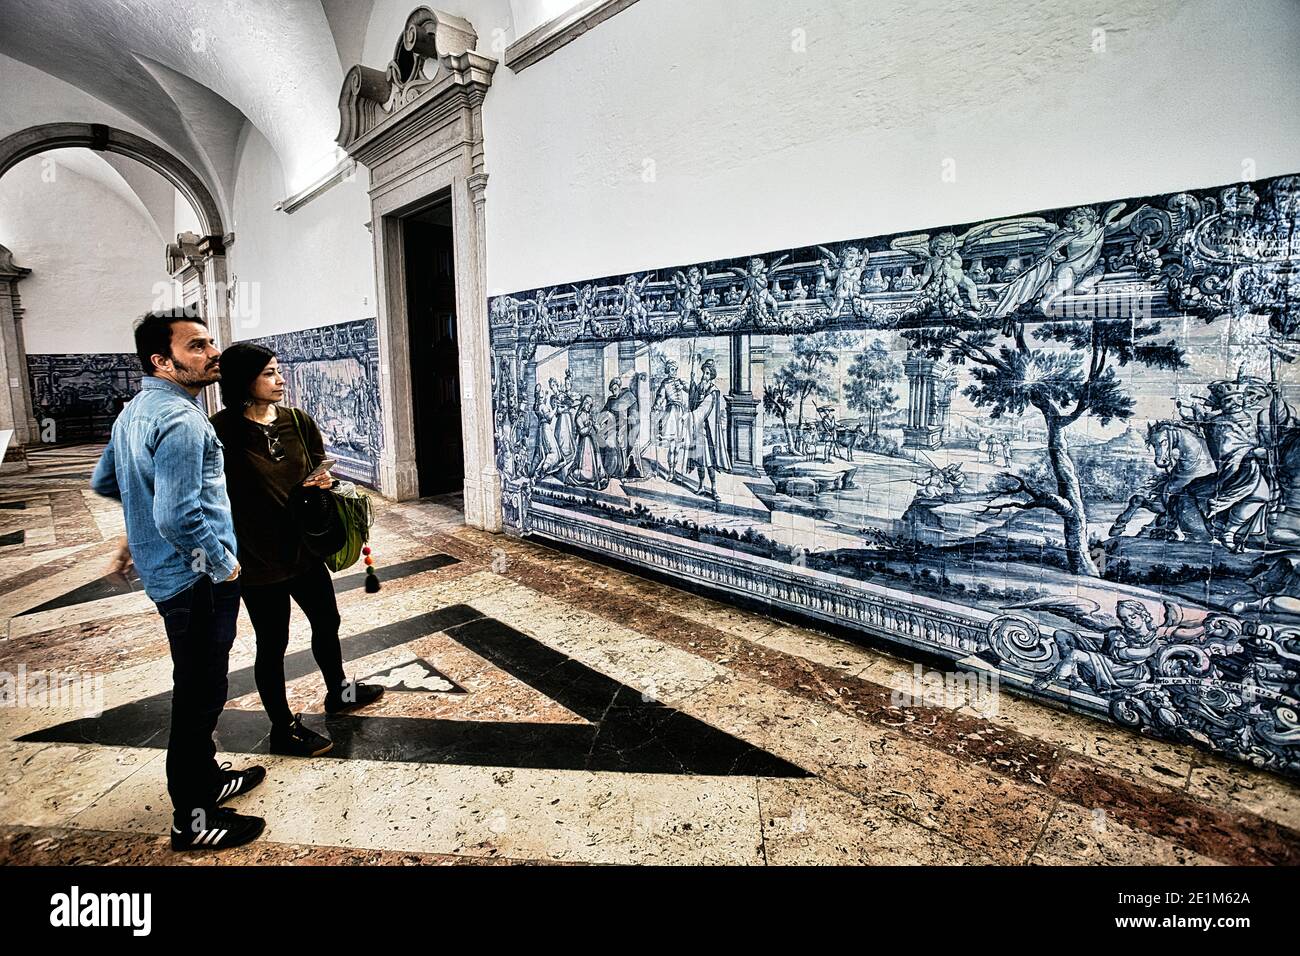 PORTUGAL / Lisbon / Tourists looking Elaborately-painted Portuguese tiles, called azulejos in Lisbon. Stock Photo